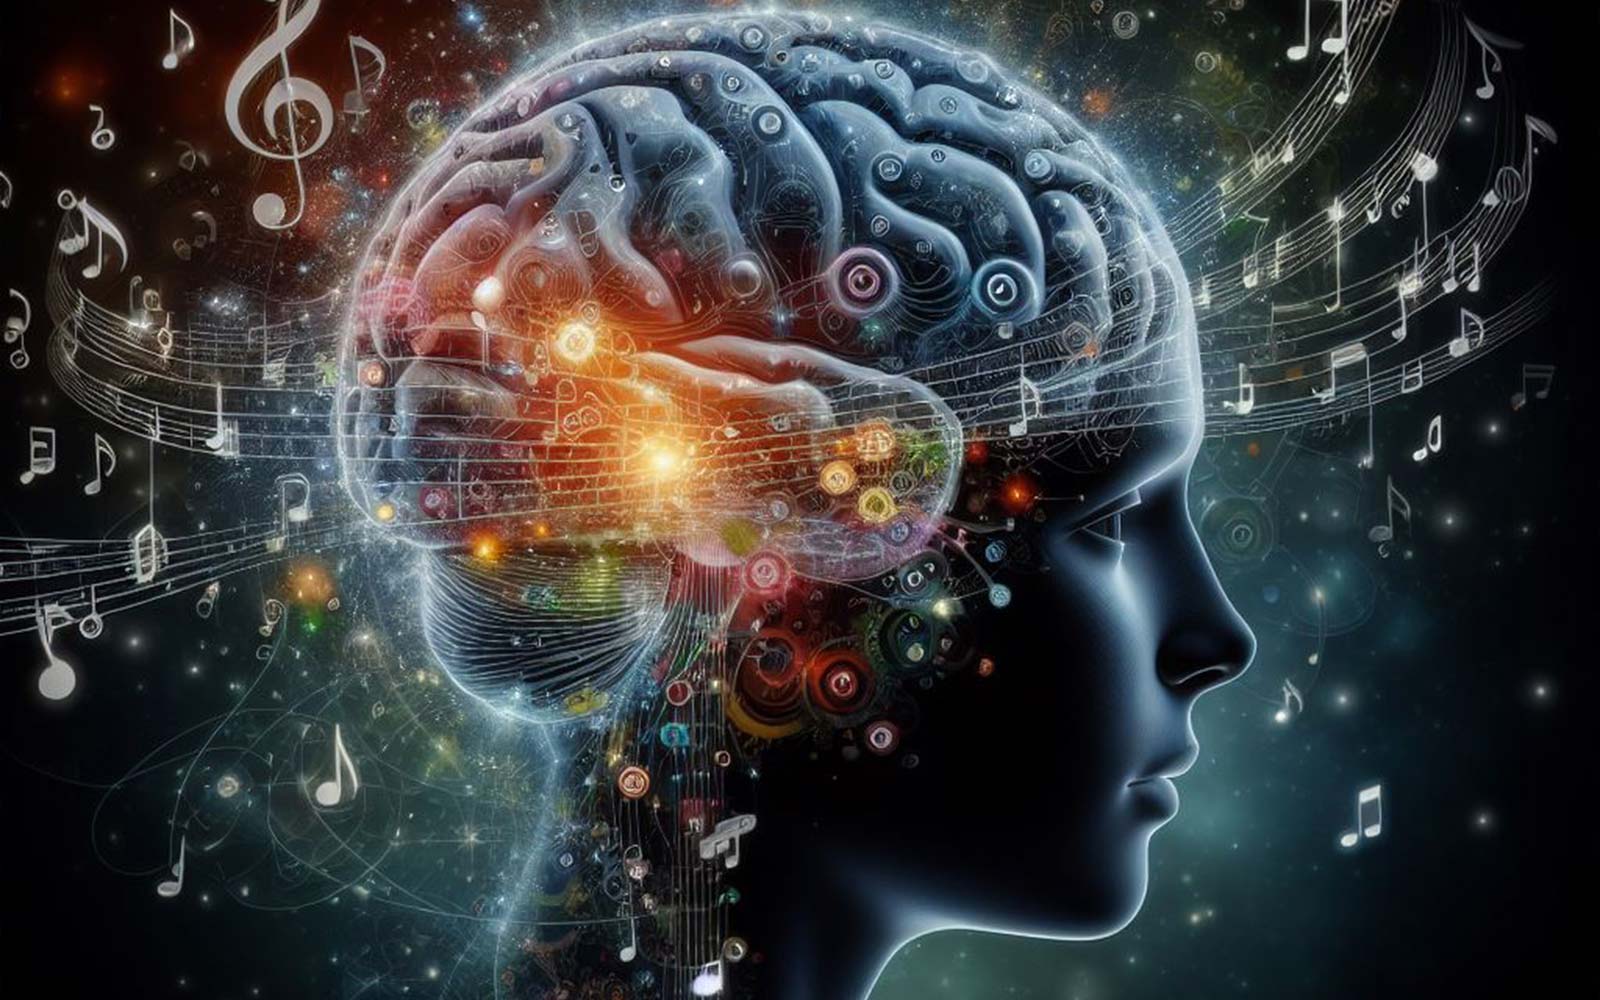 Studies show how Classical music changes the brain